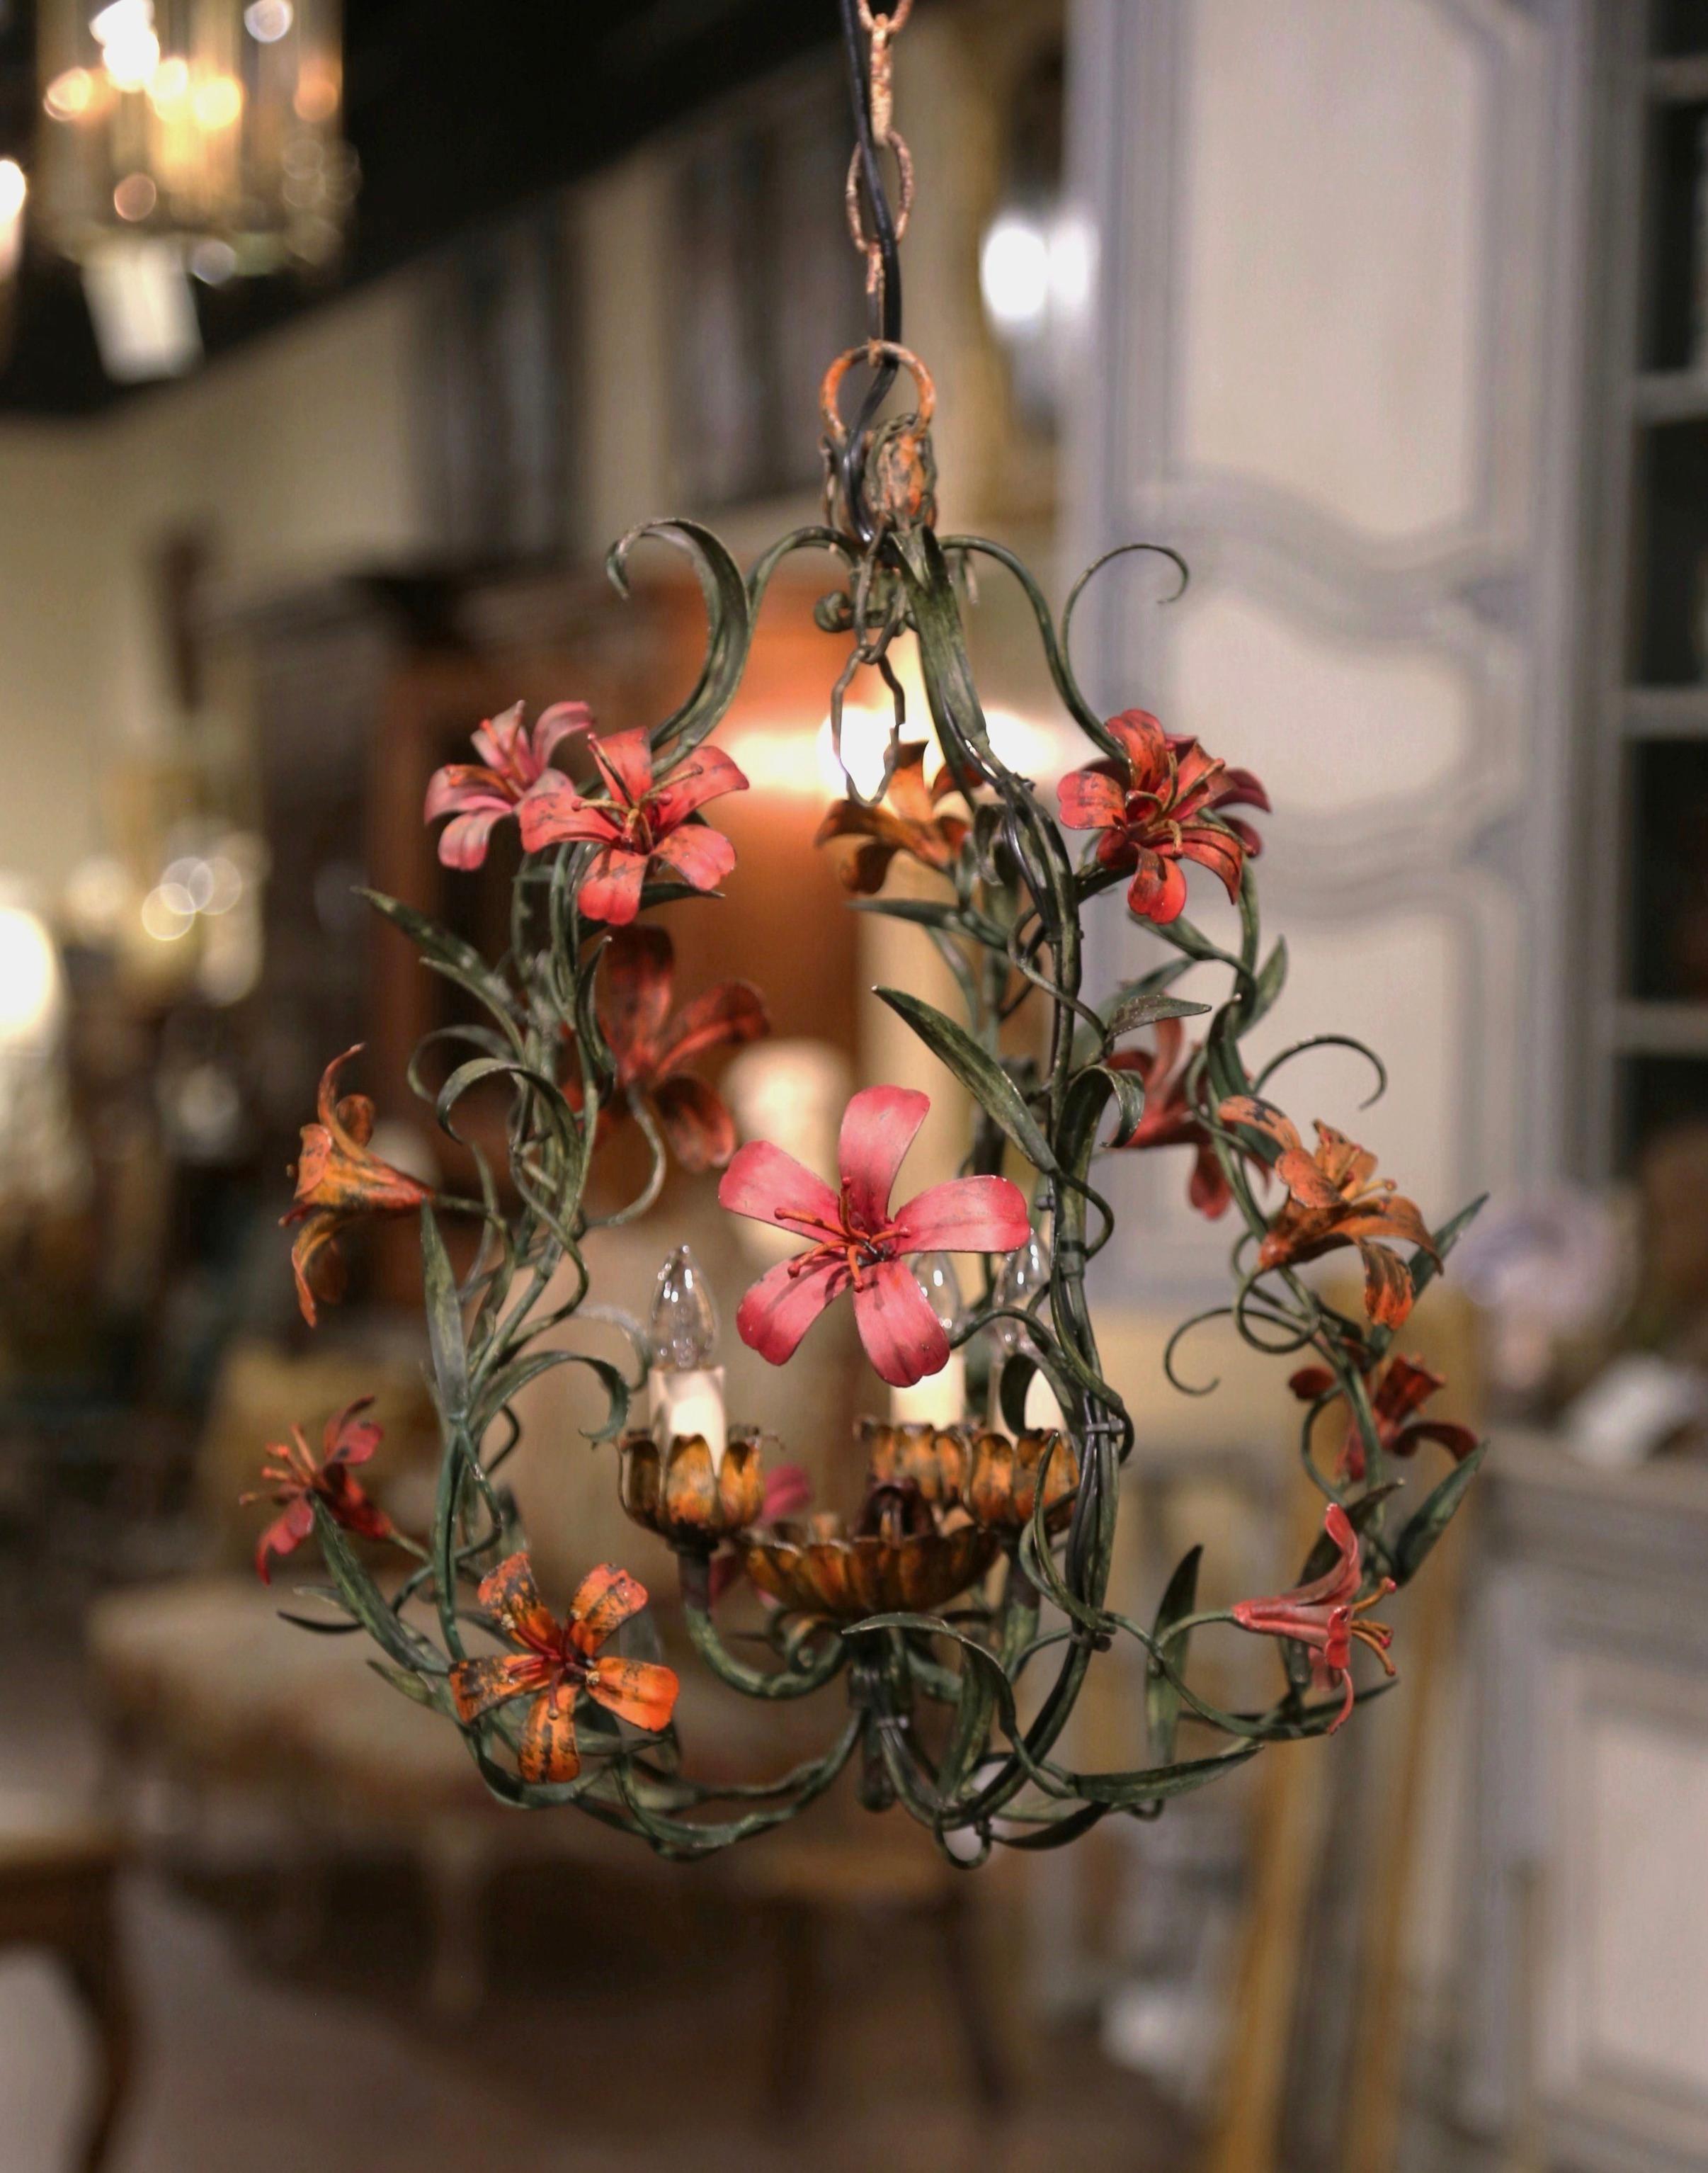 This elegant, antique chandelier was crafted in France, circa 1920. The small, charming hanging light fixture has three lights emerging from blooming tulip-shaped flowers. This antique is further embellished with realistic lily flowers in an orange,